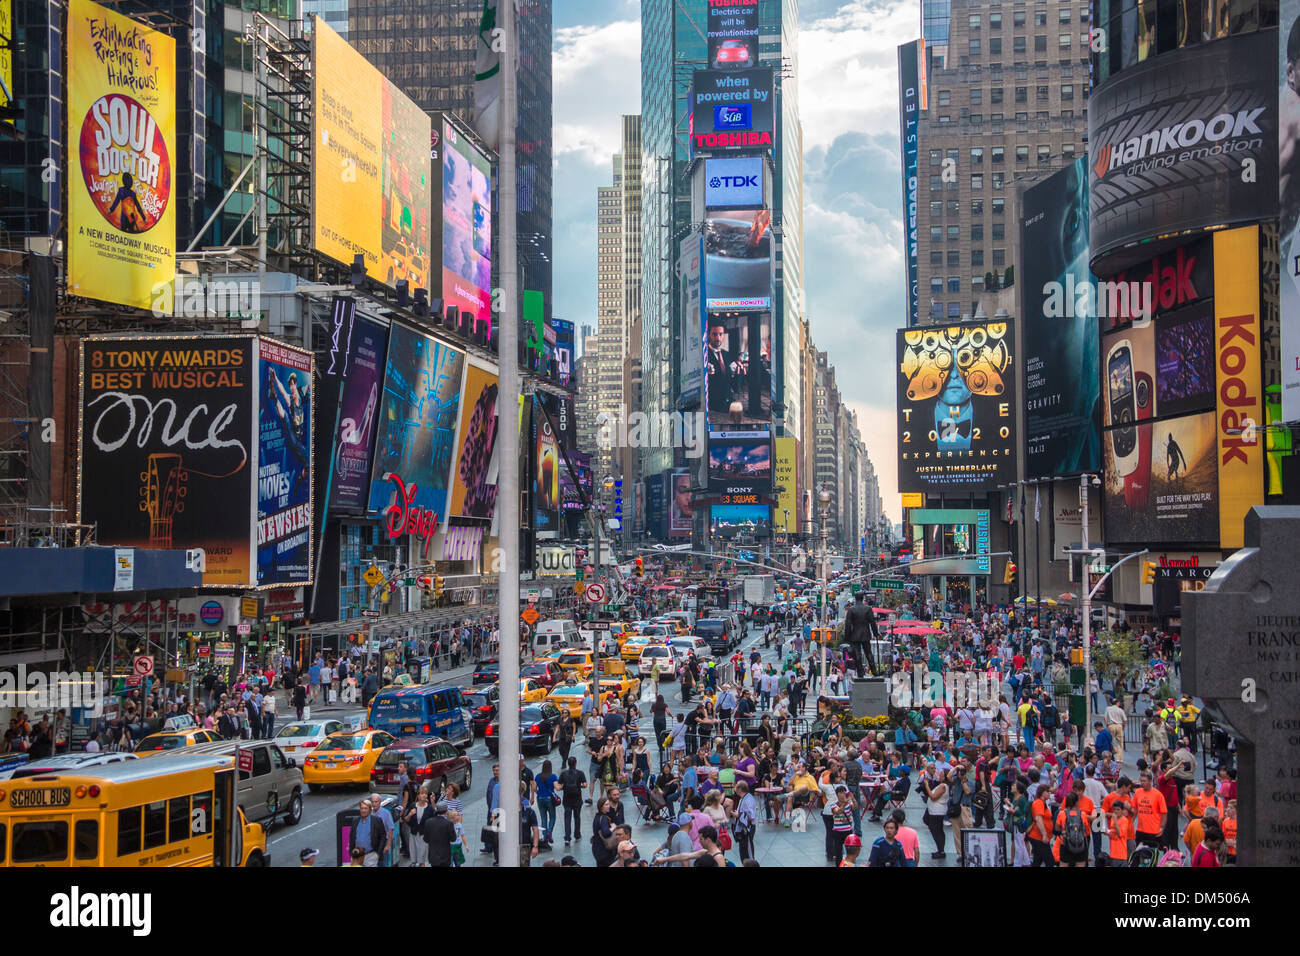 Image result for times square advertising